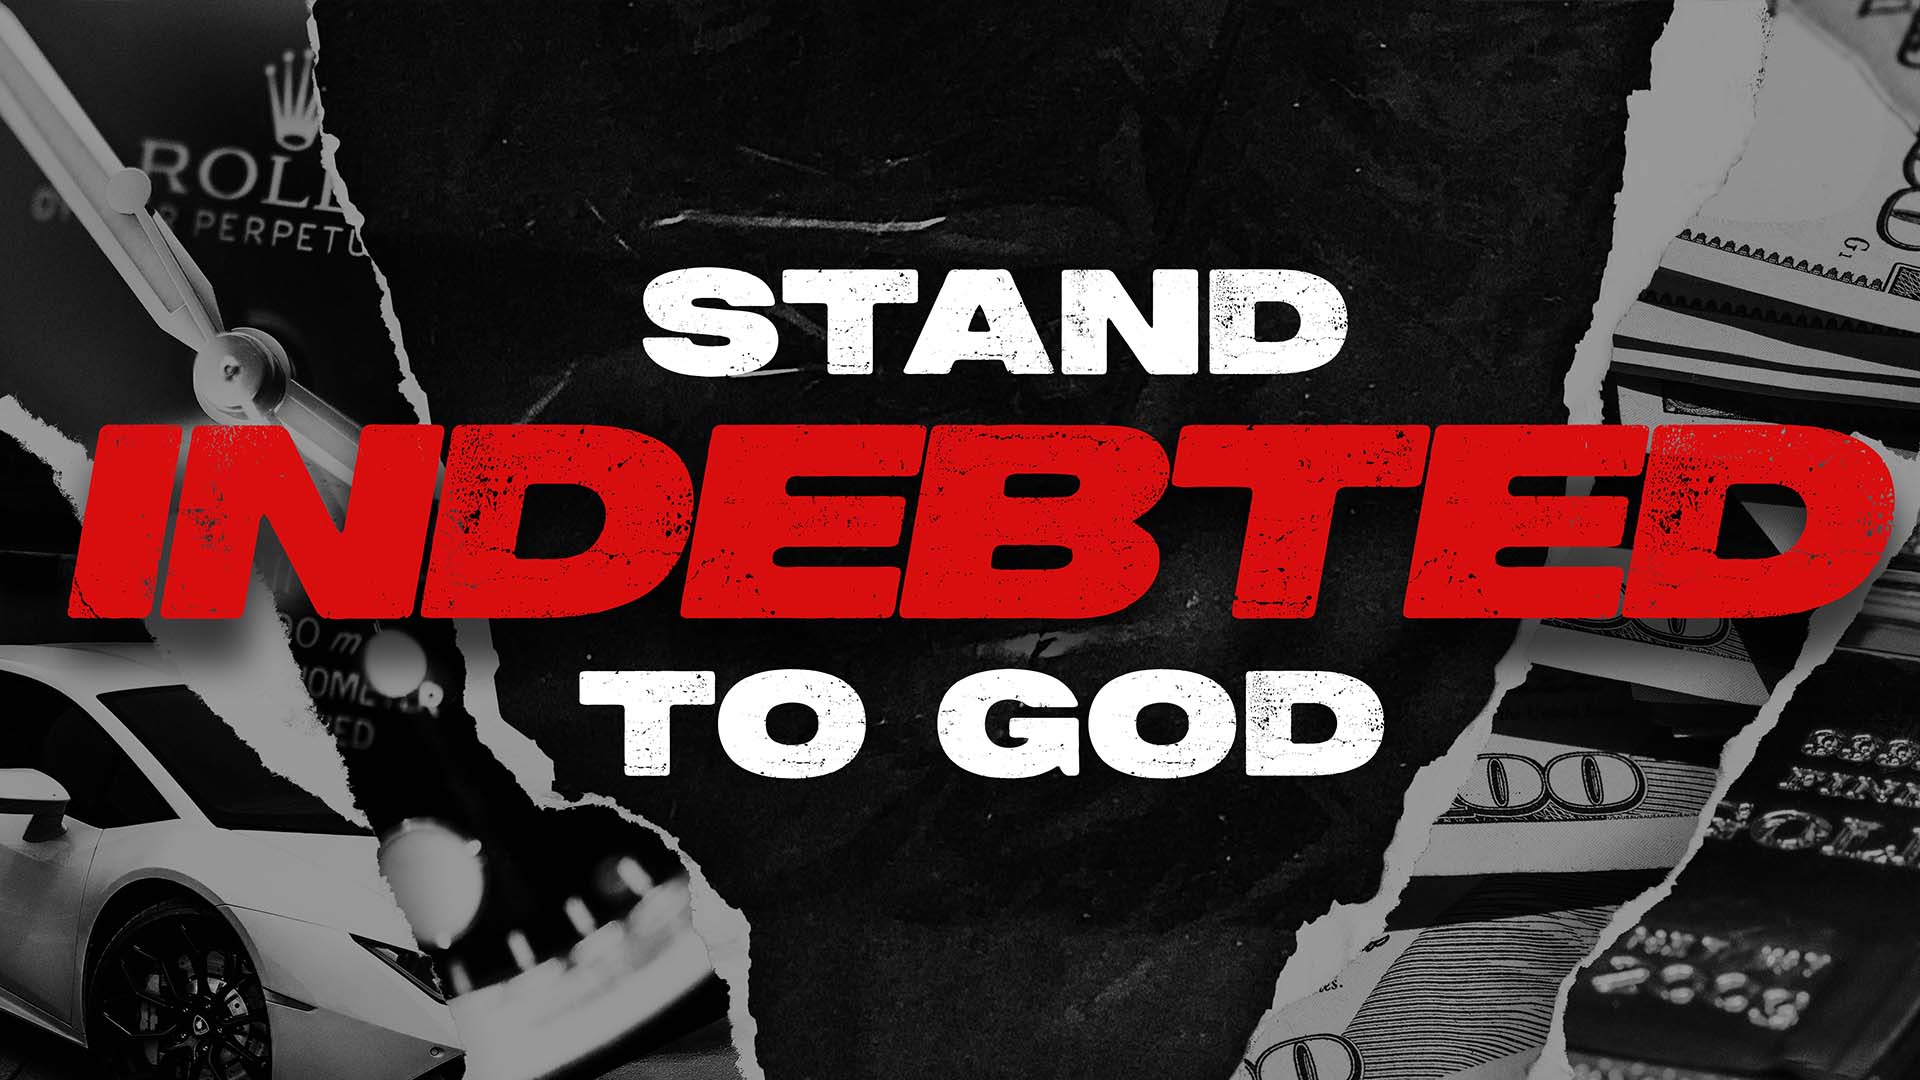 Stand Indebted To God